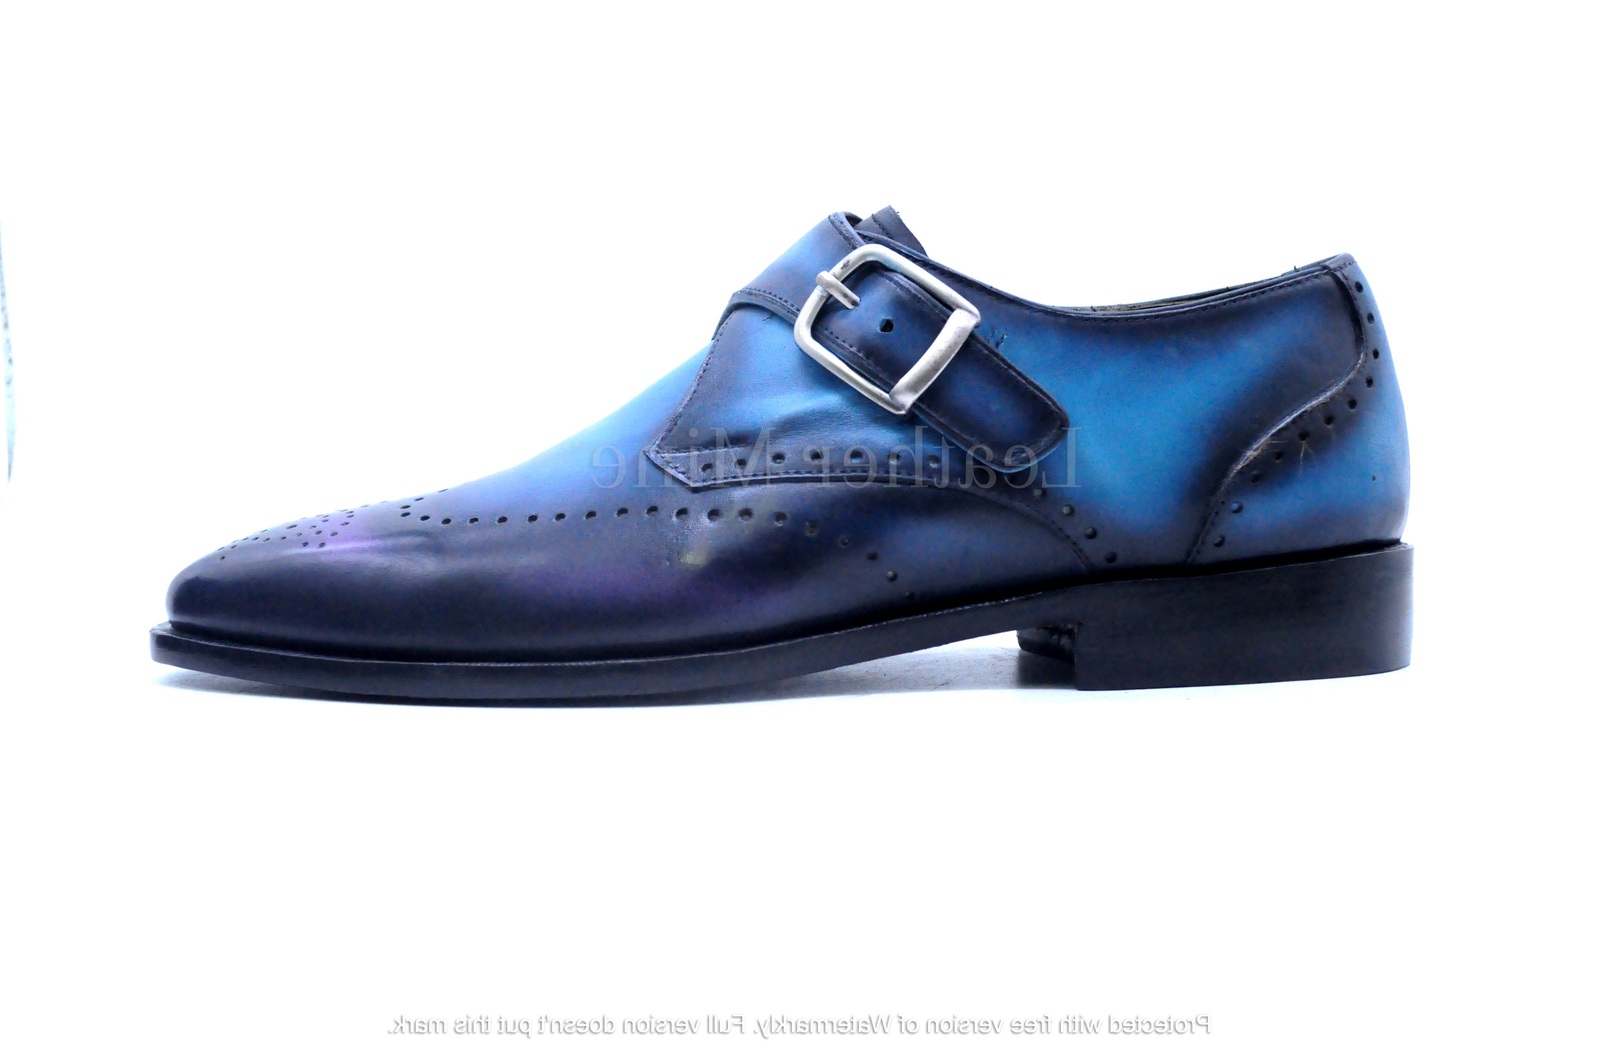 Blue Patina Monk Strap Dress Shoes For Men, Genuine Leather Custom Shoes